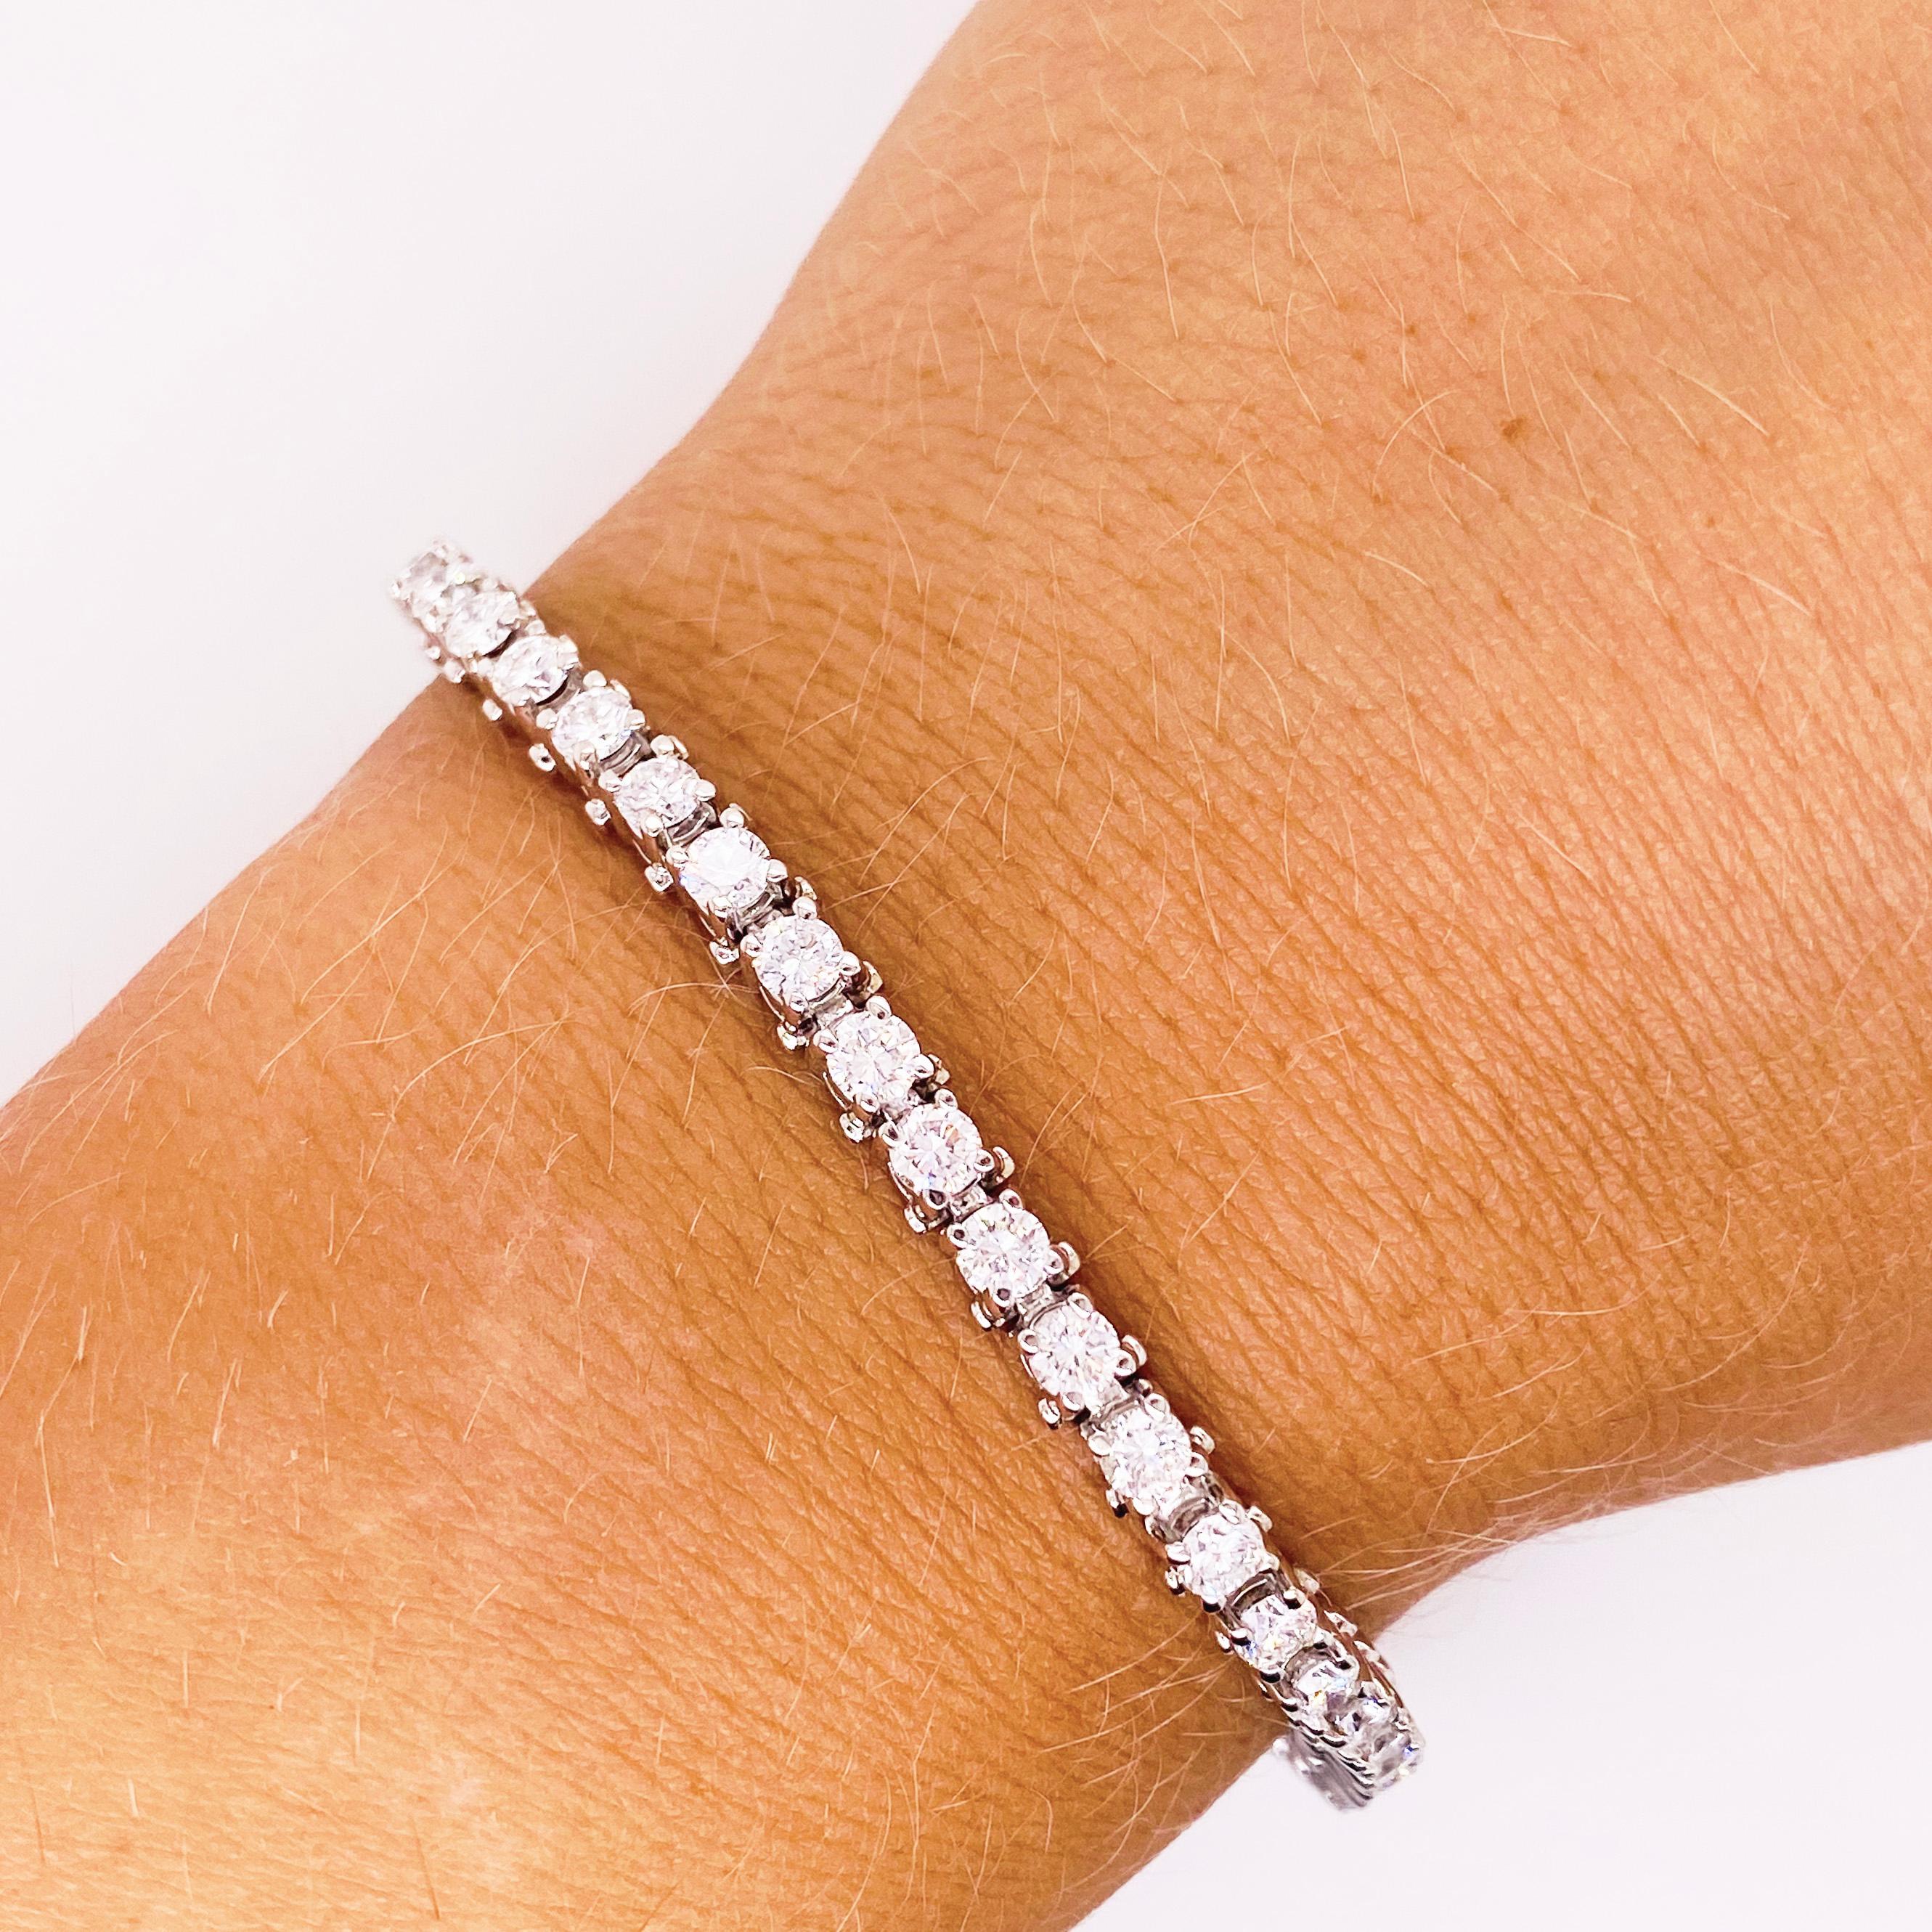 Have you always wanted a tennis bracelet?  This is one that you could wear everyday, all day, and even to bed! This 2 carat total weight diamond tennis bracelet is made really well with well constructed links and nice secure prongs that hold the 